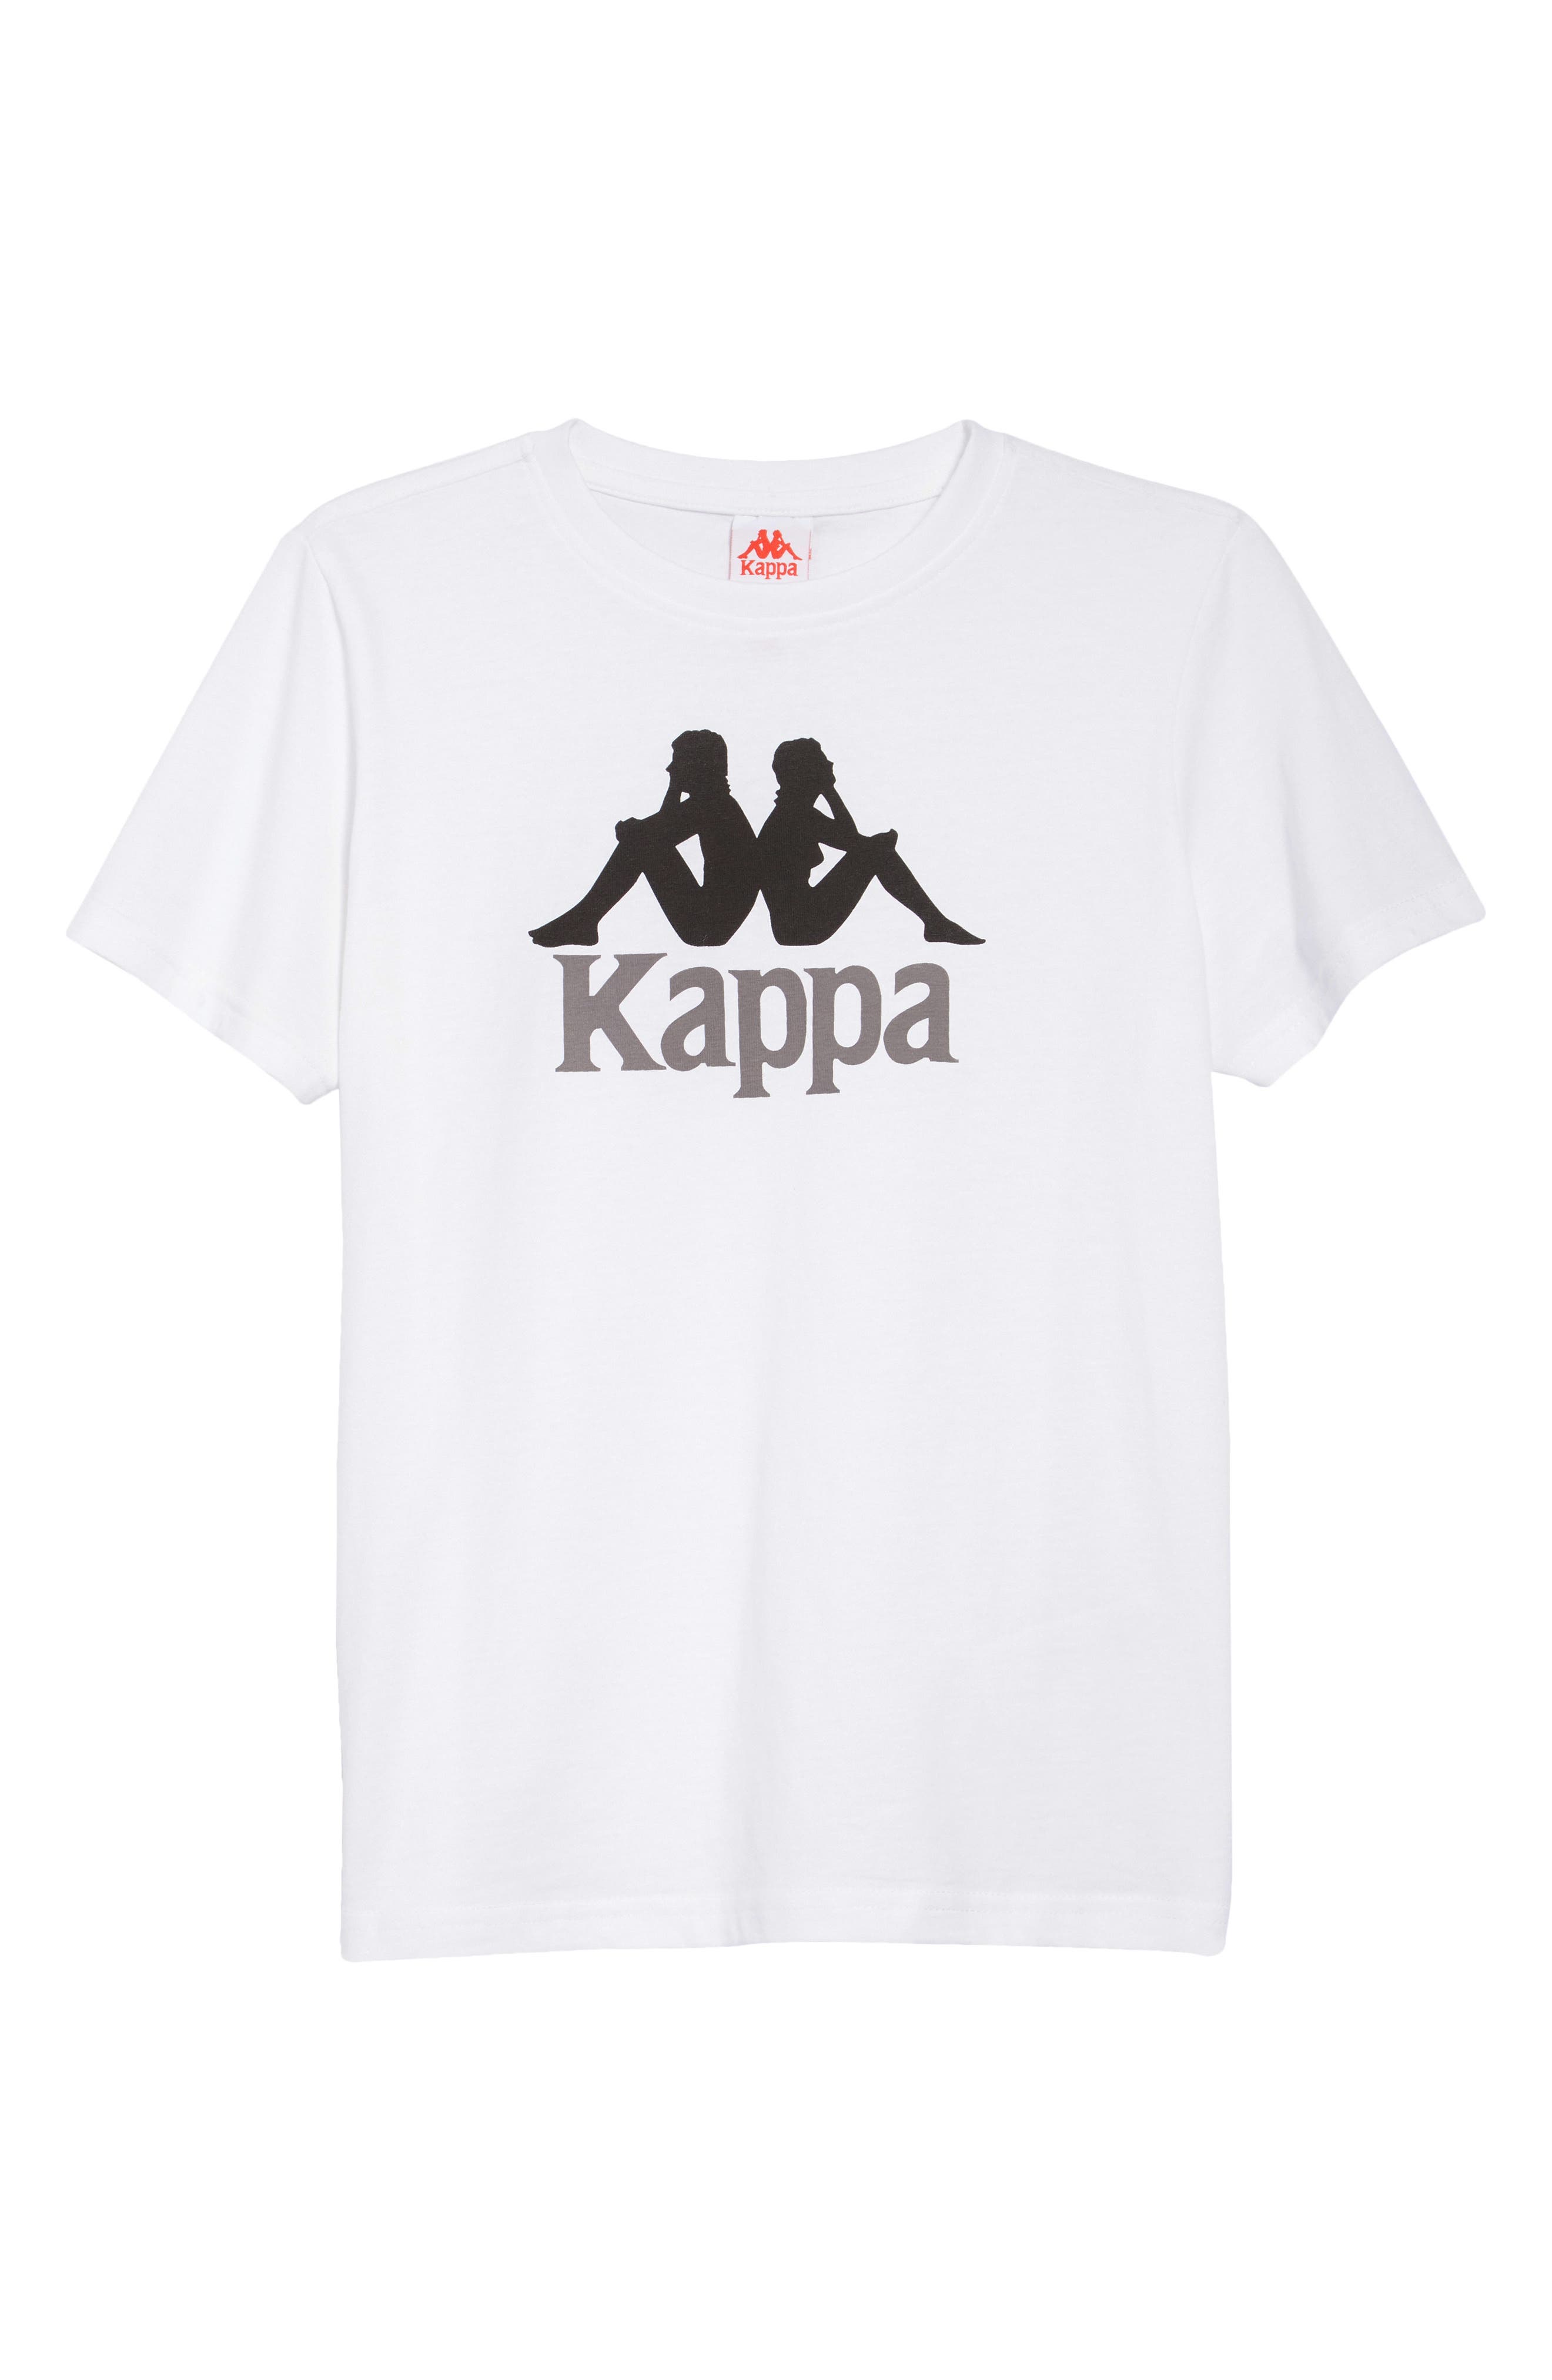 Kappa Kids' Authentic Estessi Logo Graphic Tee in White-Black-Grey Dk at Nordstrom, Size 8Y Us